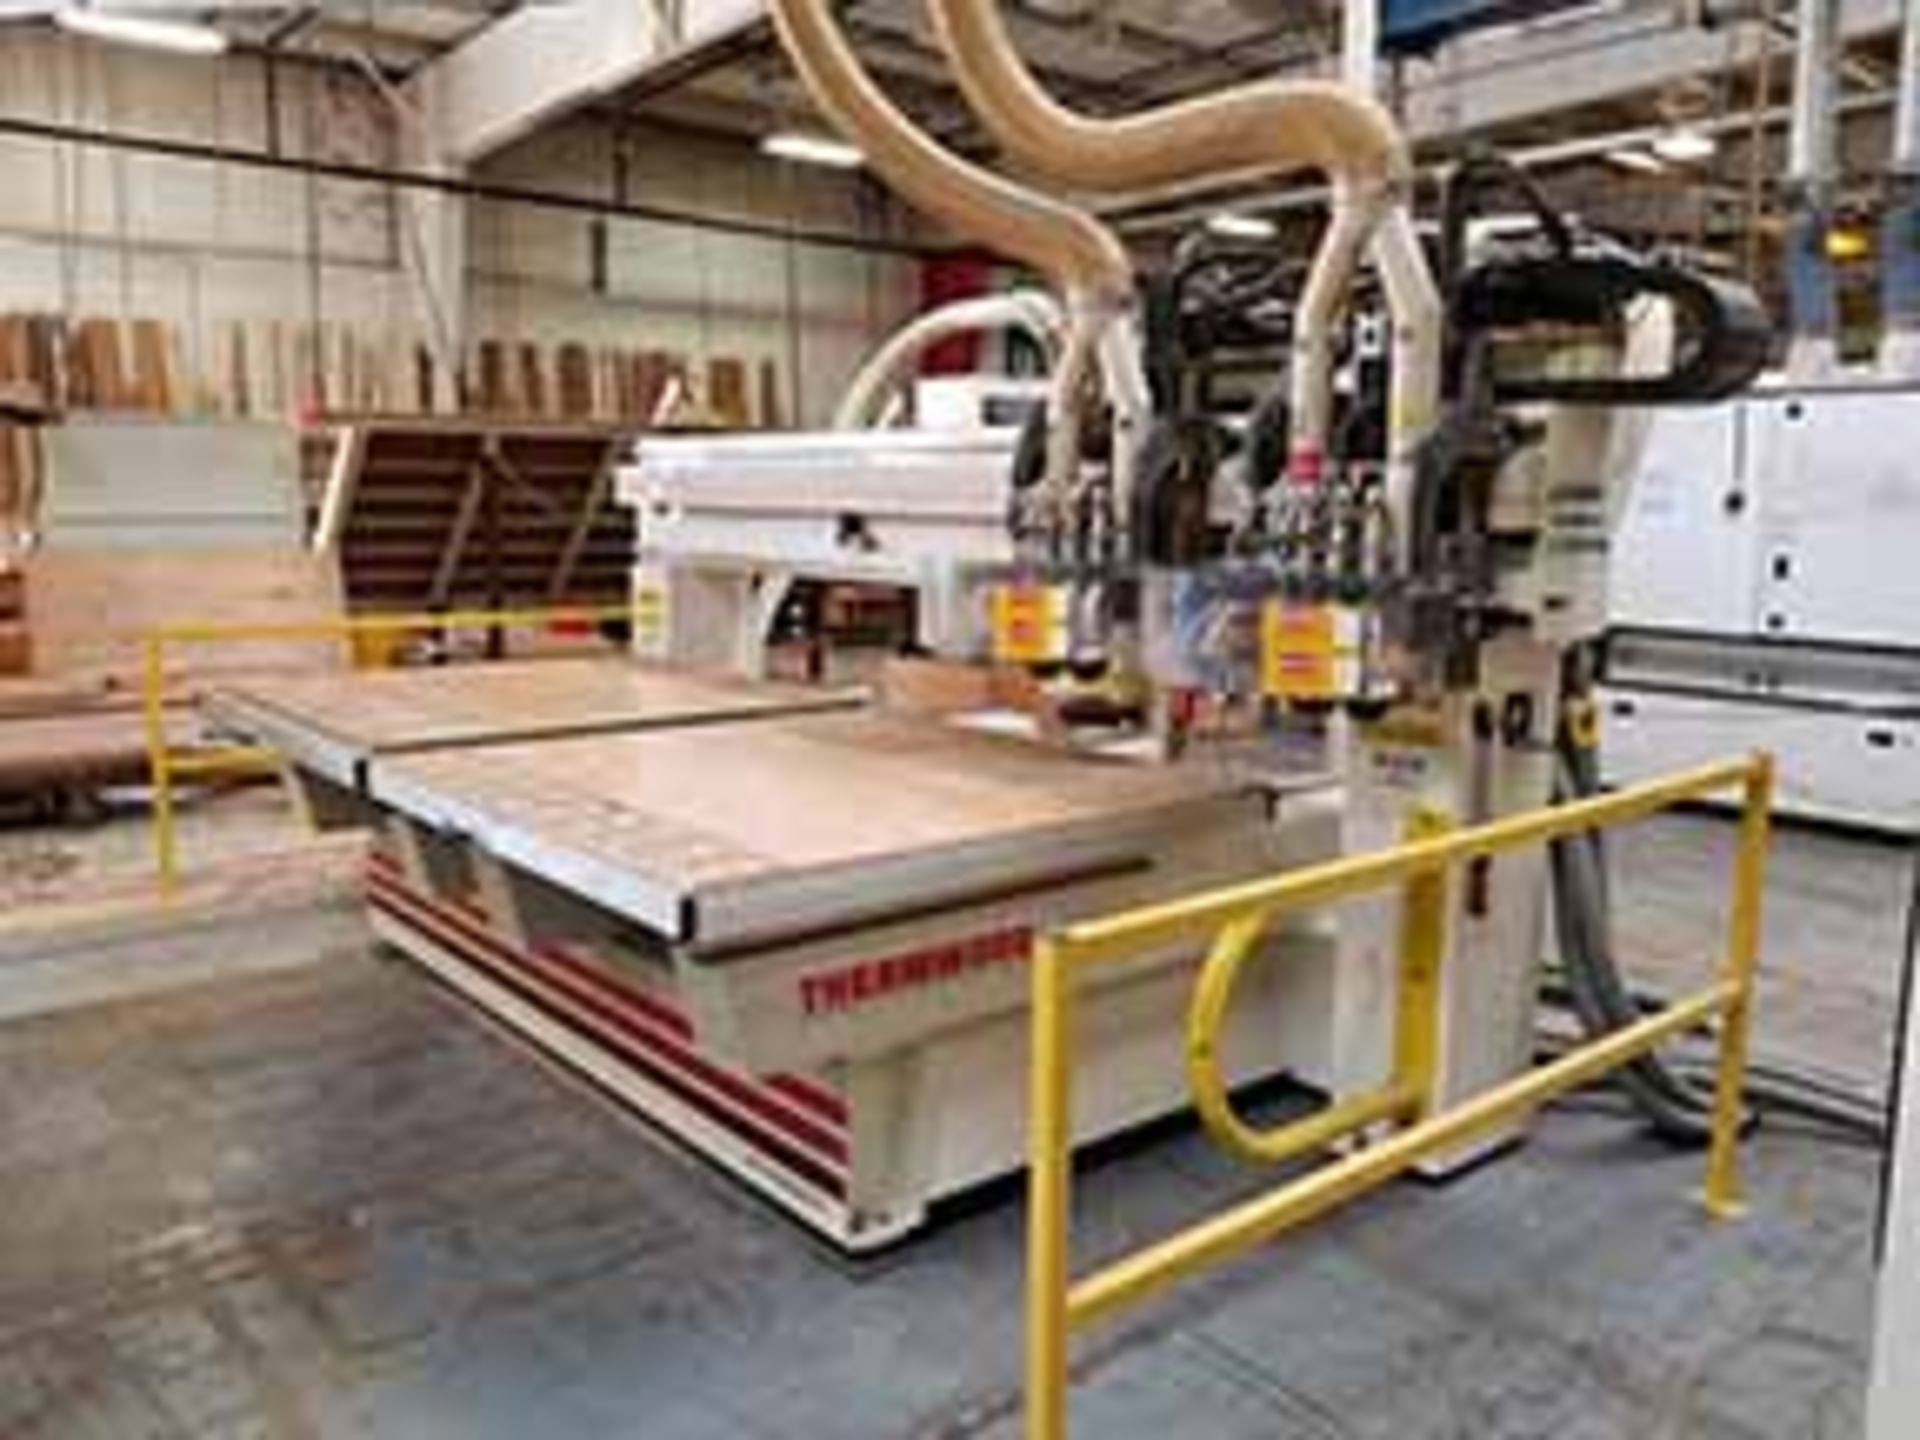 THERMWOOD C42 ROUTER; S/N C42165050, DUAL ROUTER HEADS, 151'' ROUTER TRAVEL, DUAL 5' X 5' SLIDING